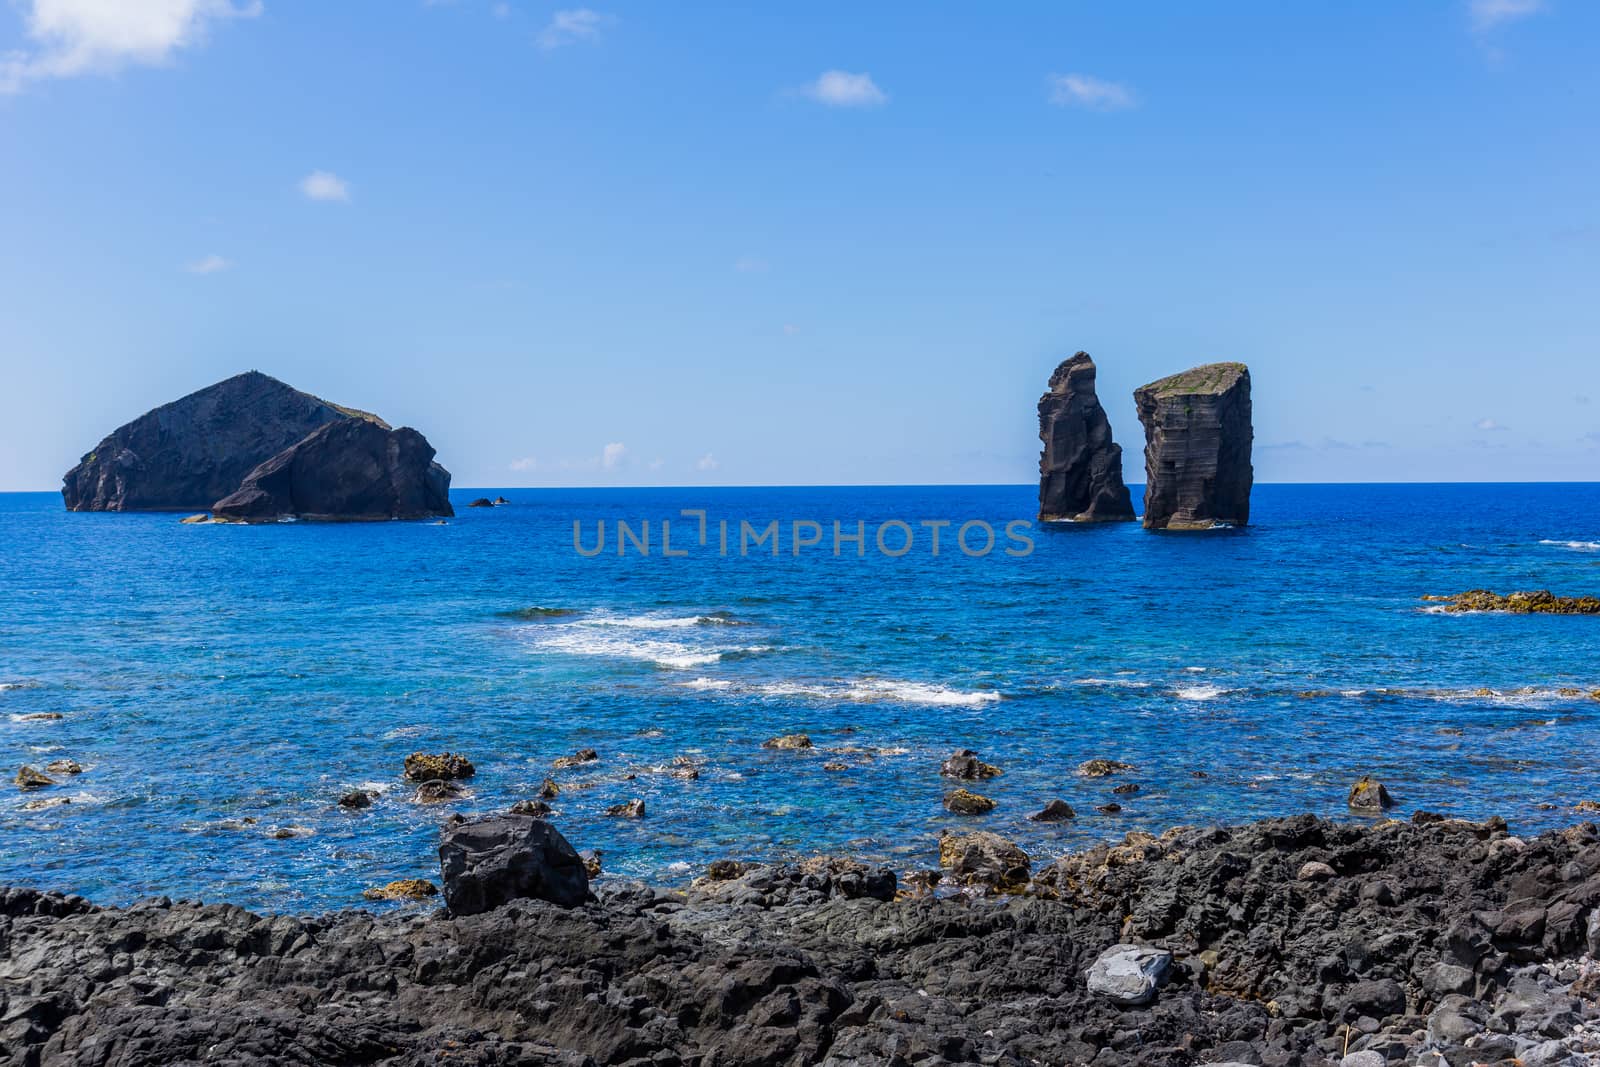 Mosteiros on the island of Sao Miguel by zittto